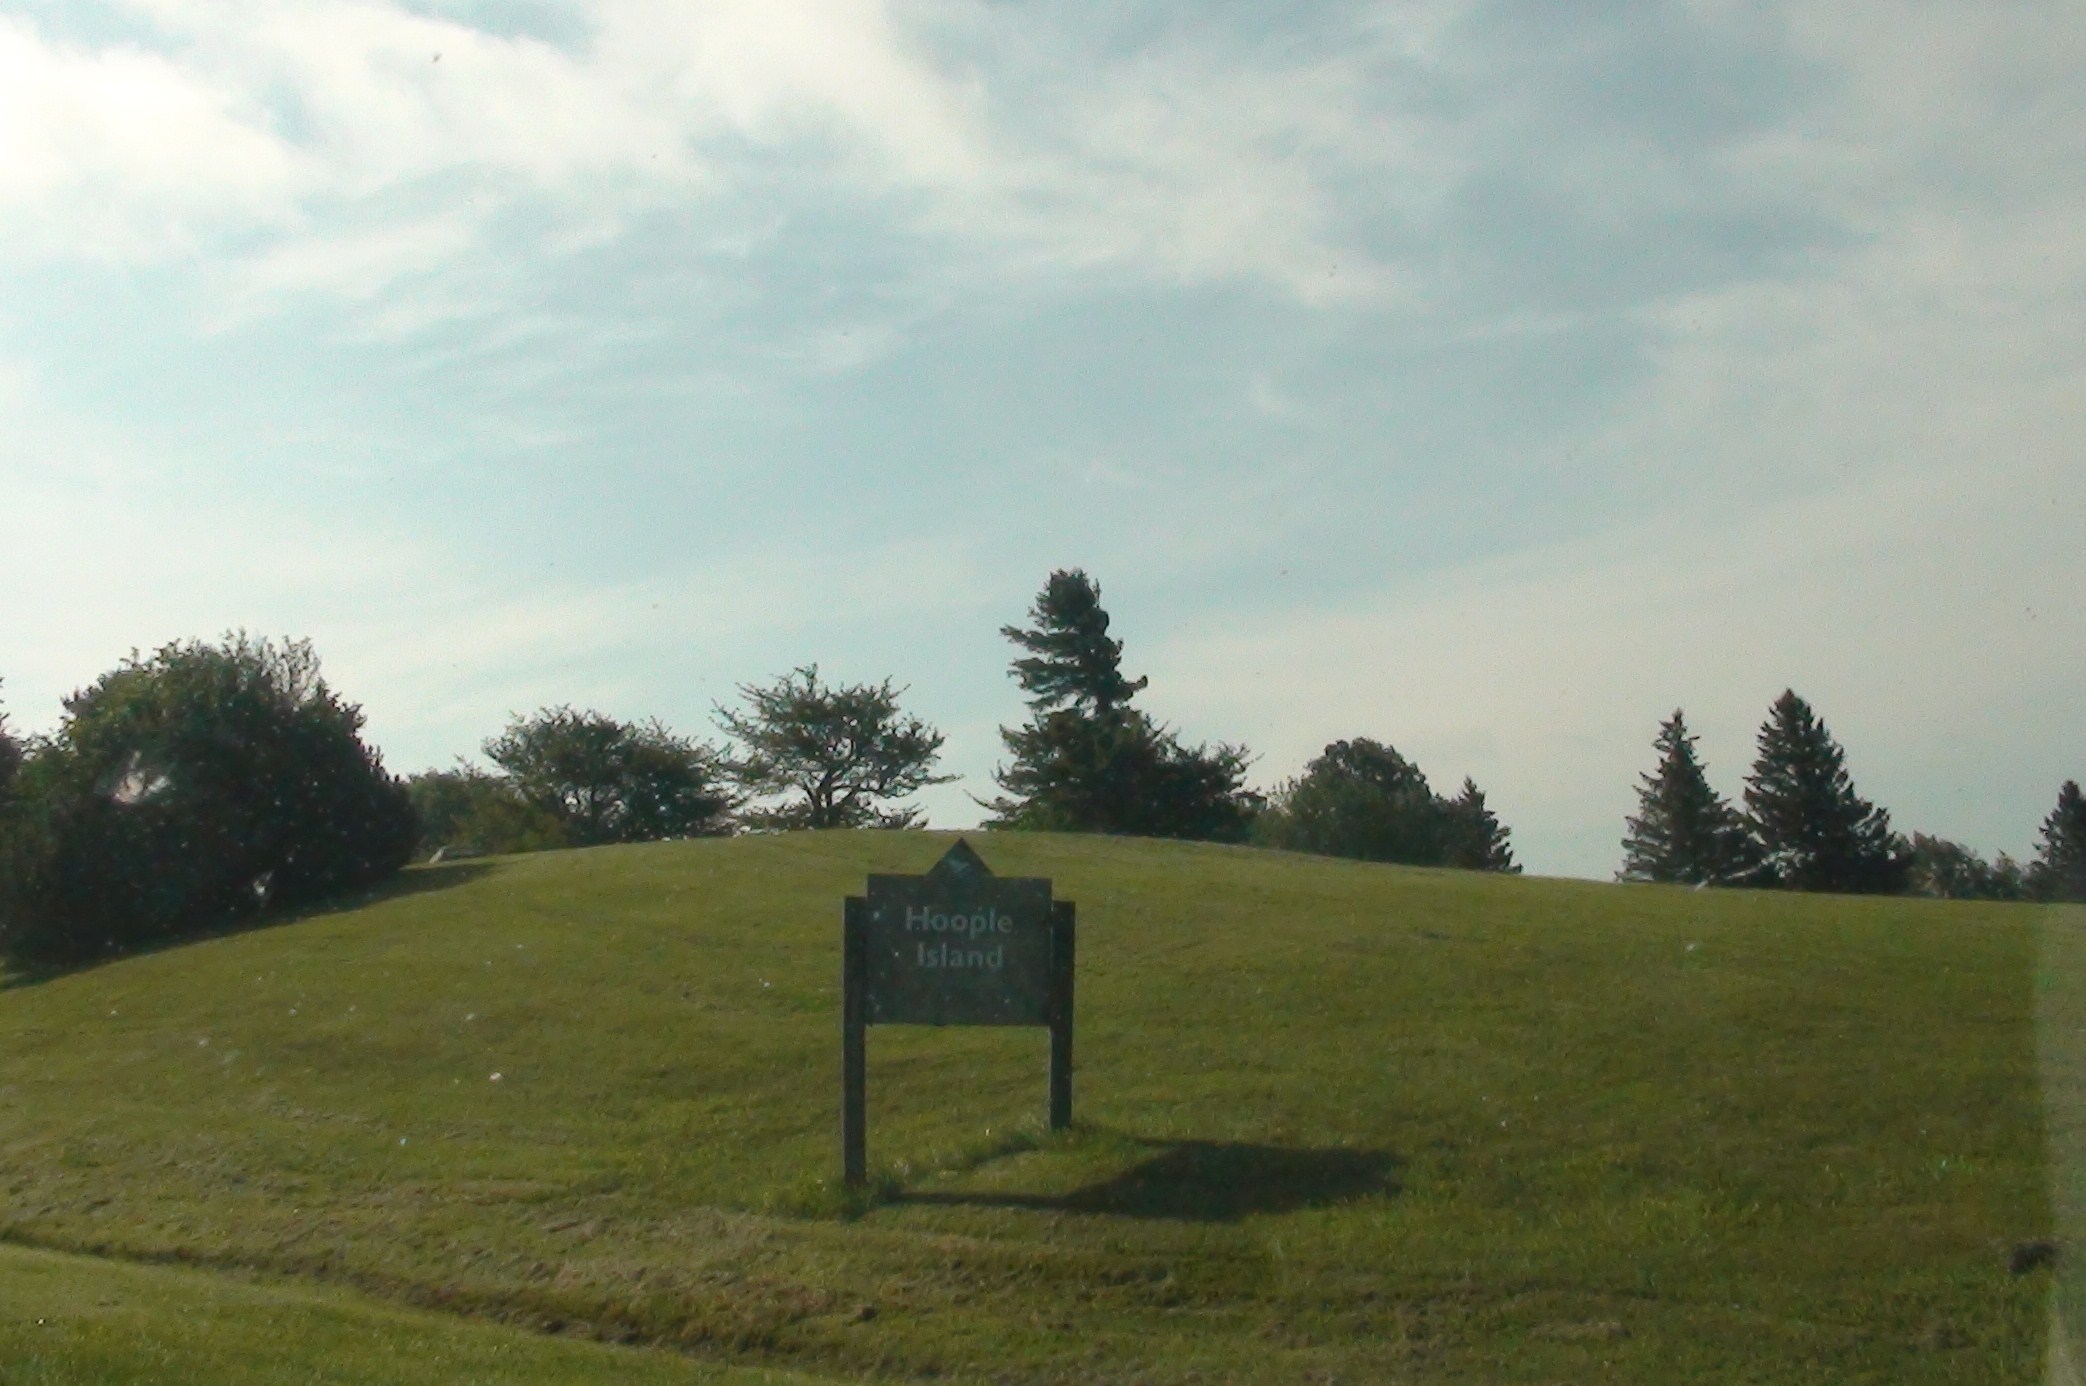 a sign sits on a hill in a grassy area